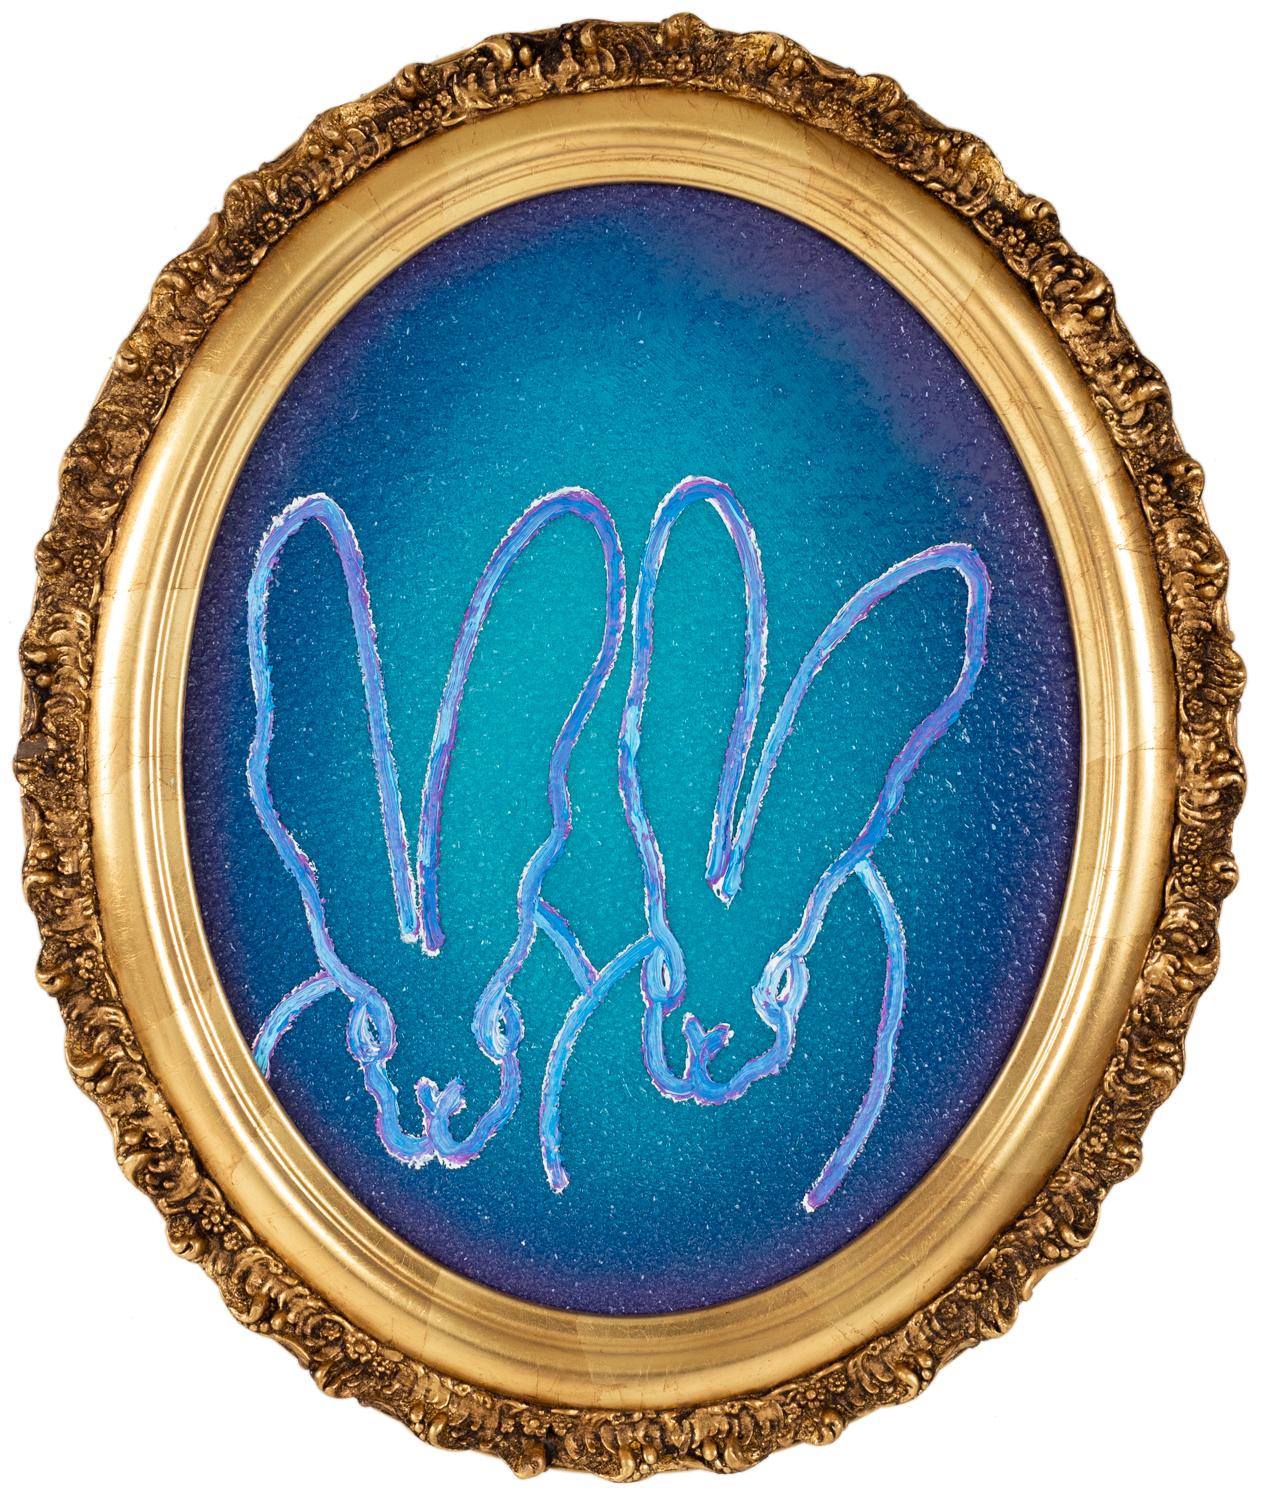 Hunt Slonem Figurative Painting - Rhapsody in Blue "Bunny Painting" Original Oil Painting Oval Vintage Frame